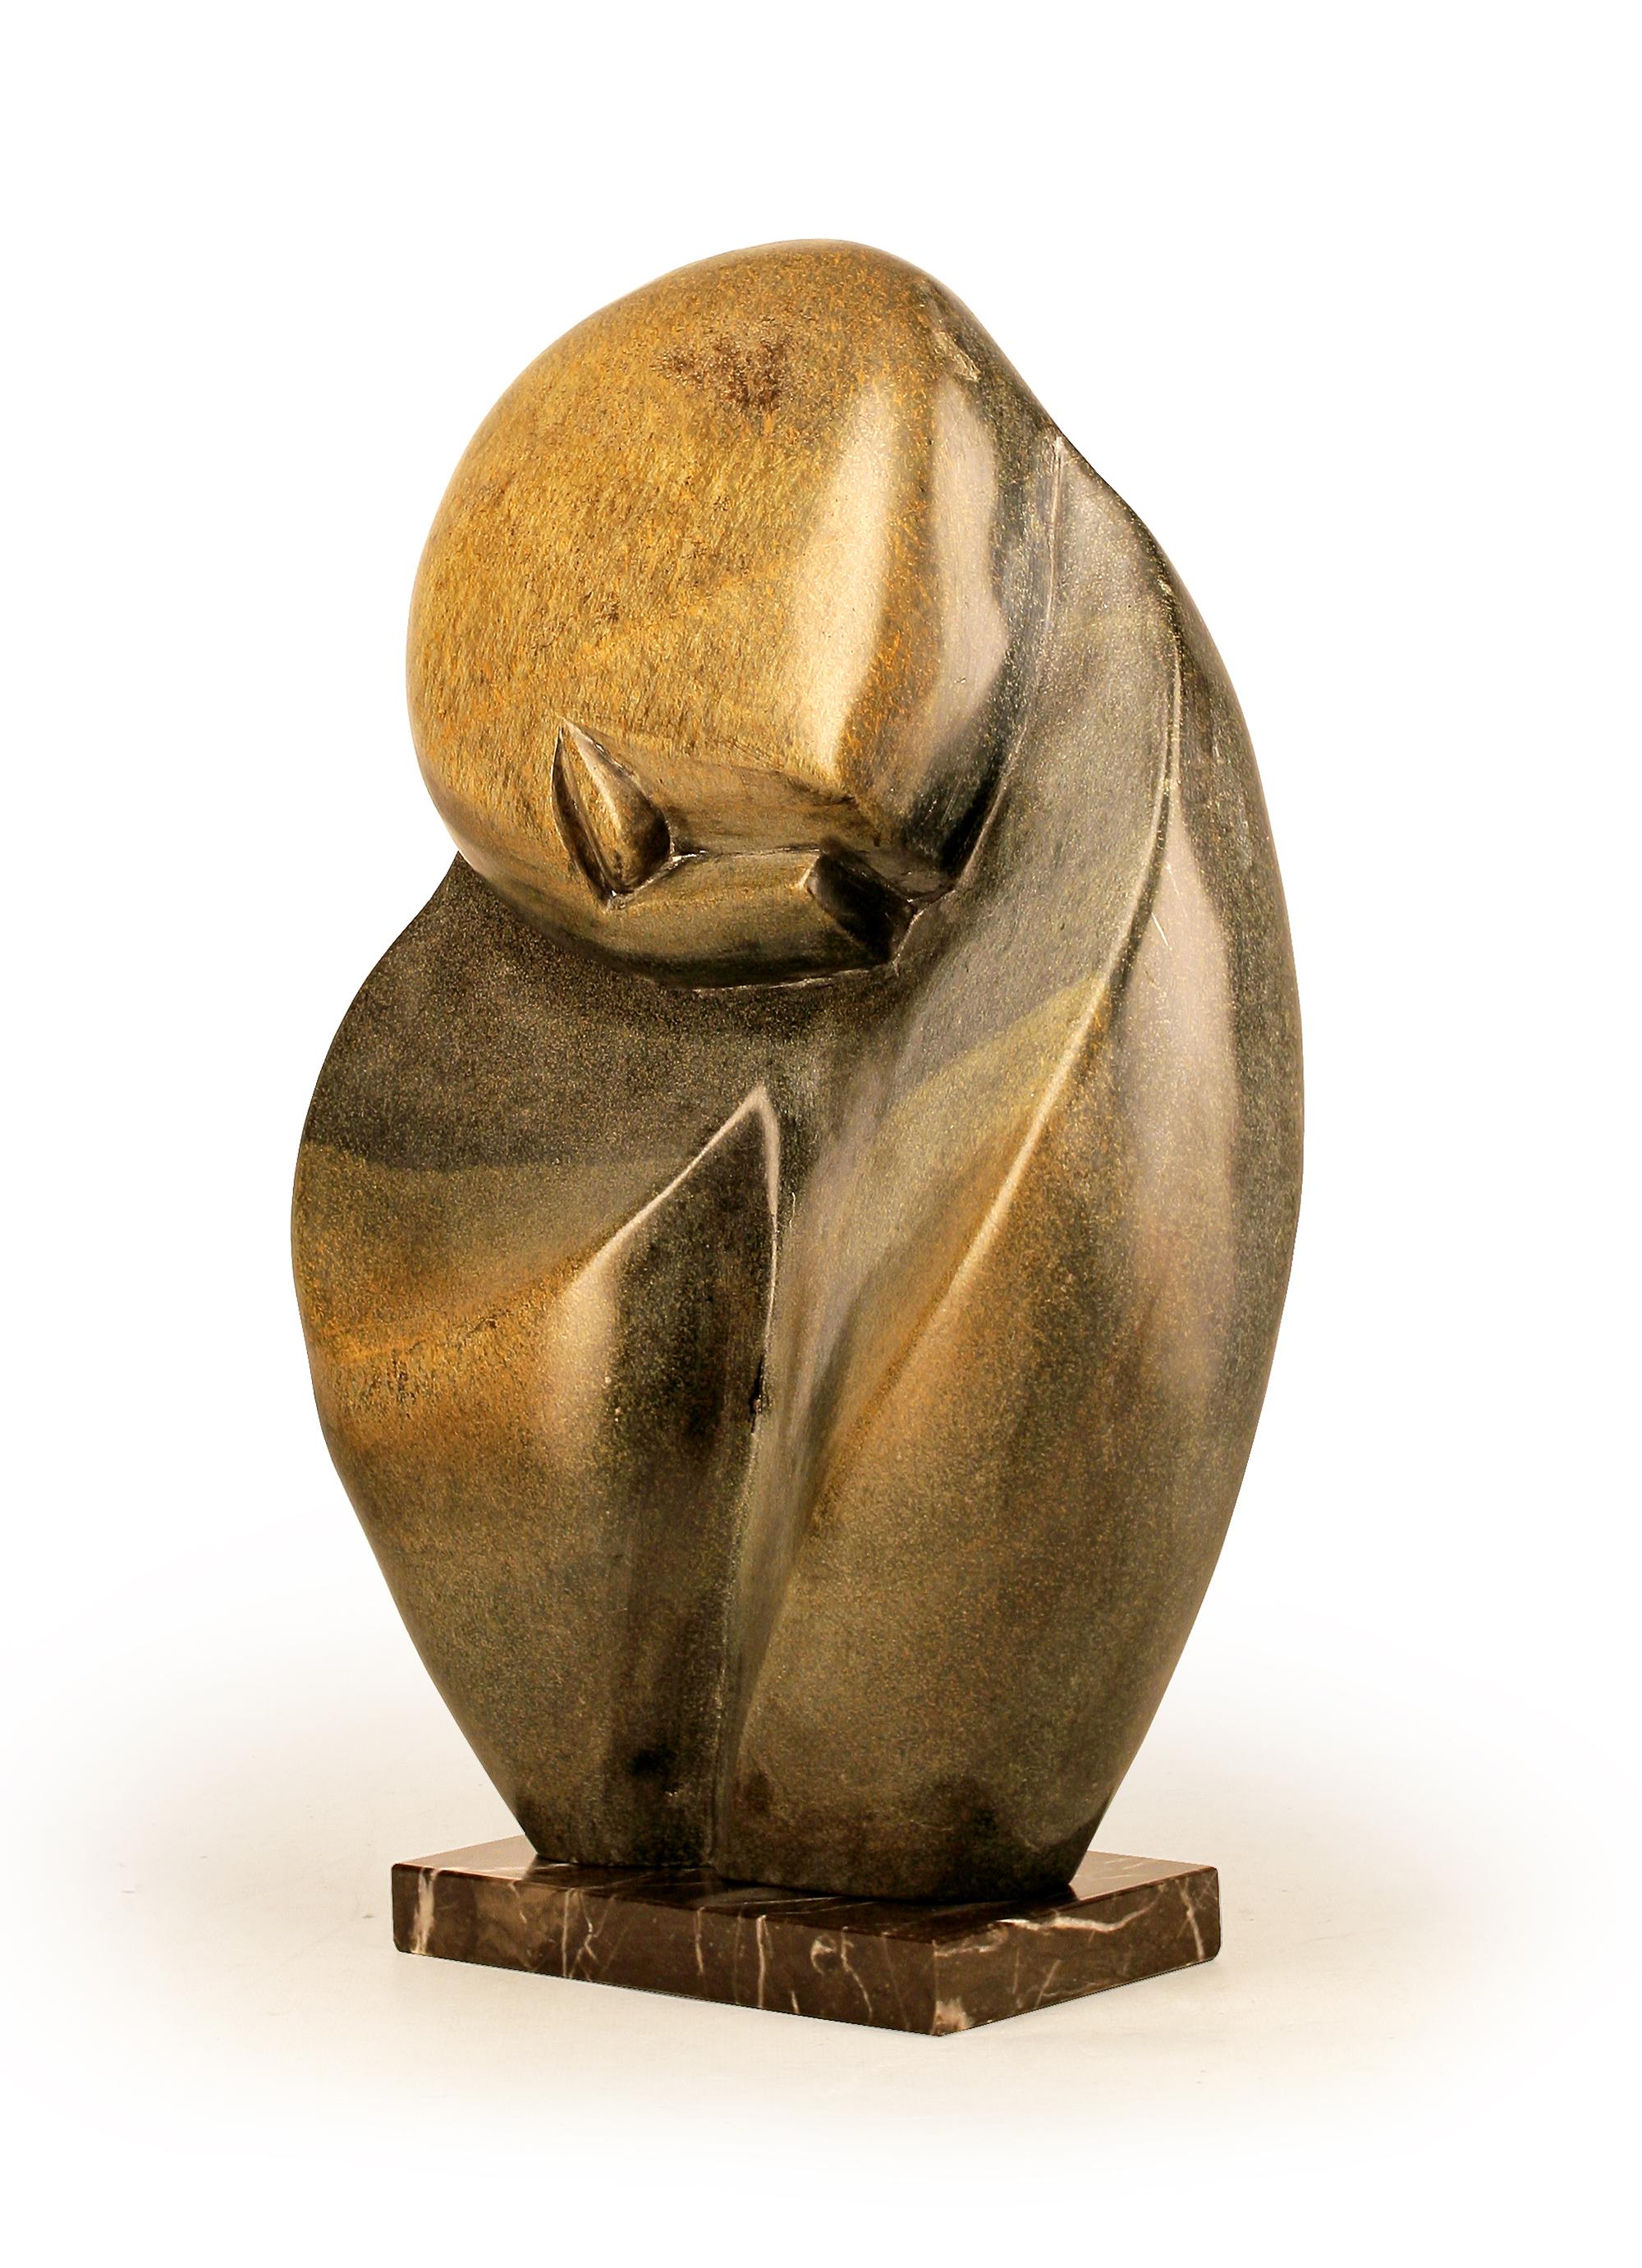 Modernist african inspired german hand-crafted stone sculpture with marble base

By: Henry Moore (in the style of), Constantin Brancusi 2 (in the style of)
Material: stone, marble
Technique: hand-crafted, polished
Dimensions: 4 in x 11.5 in x 17